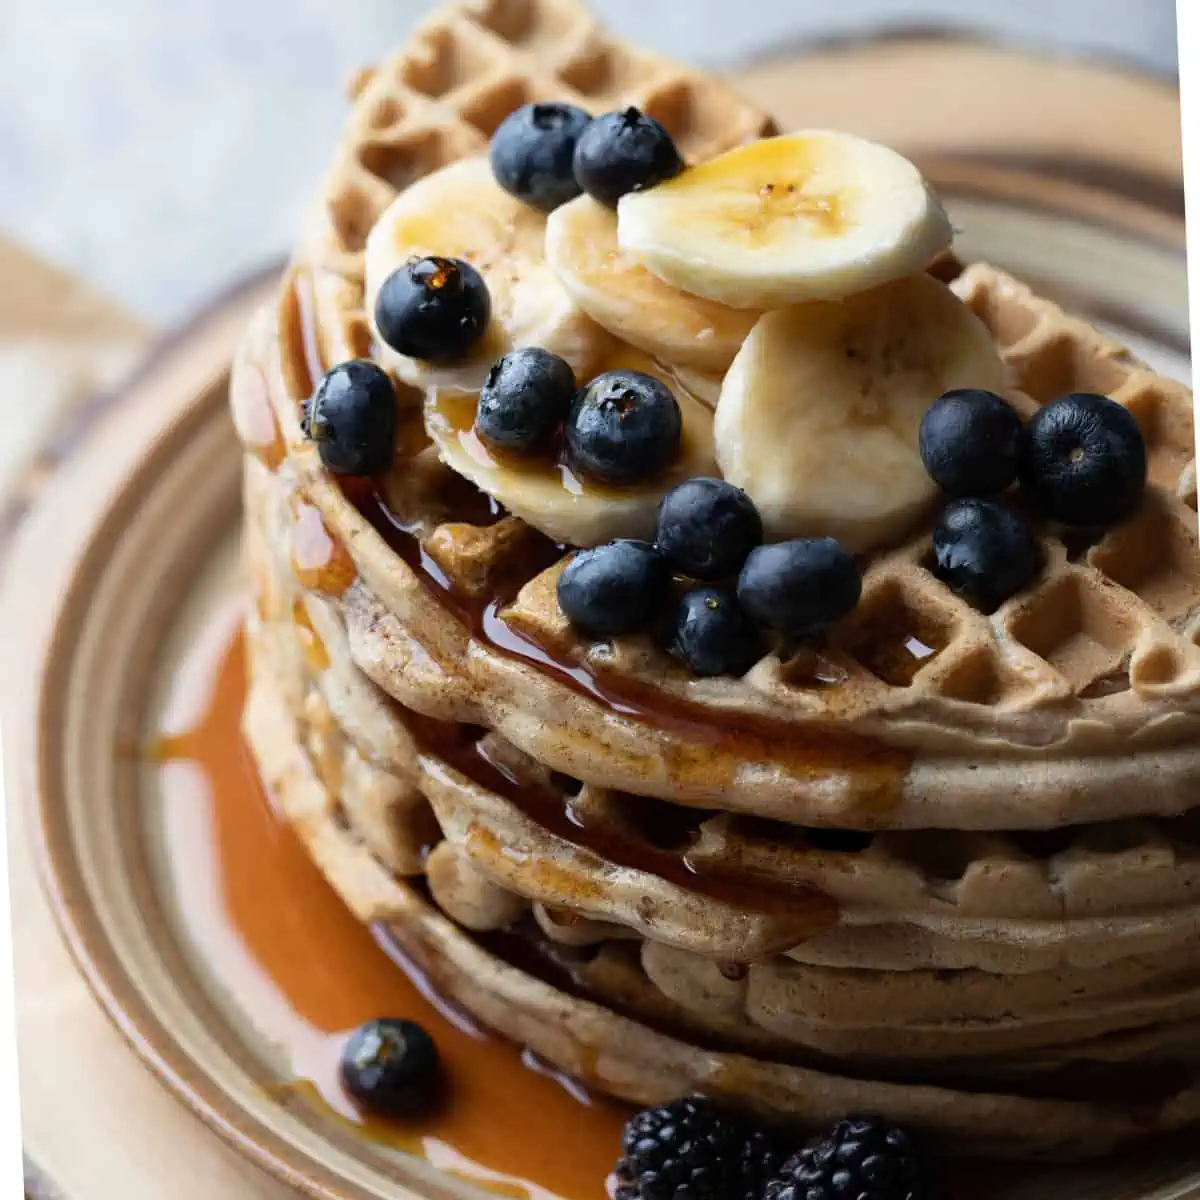 Close up image of a stack of vegan gluten free waffles with fresh fruit on top. the image is to show the fluffy texture of the final product.